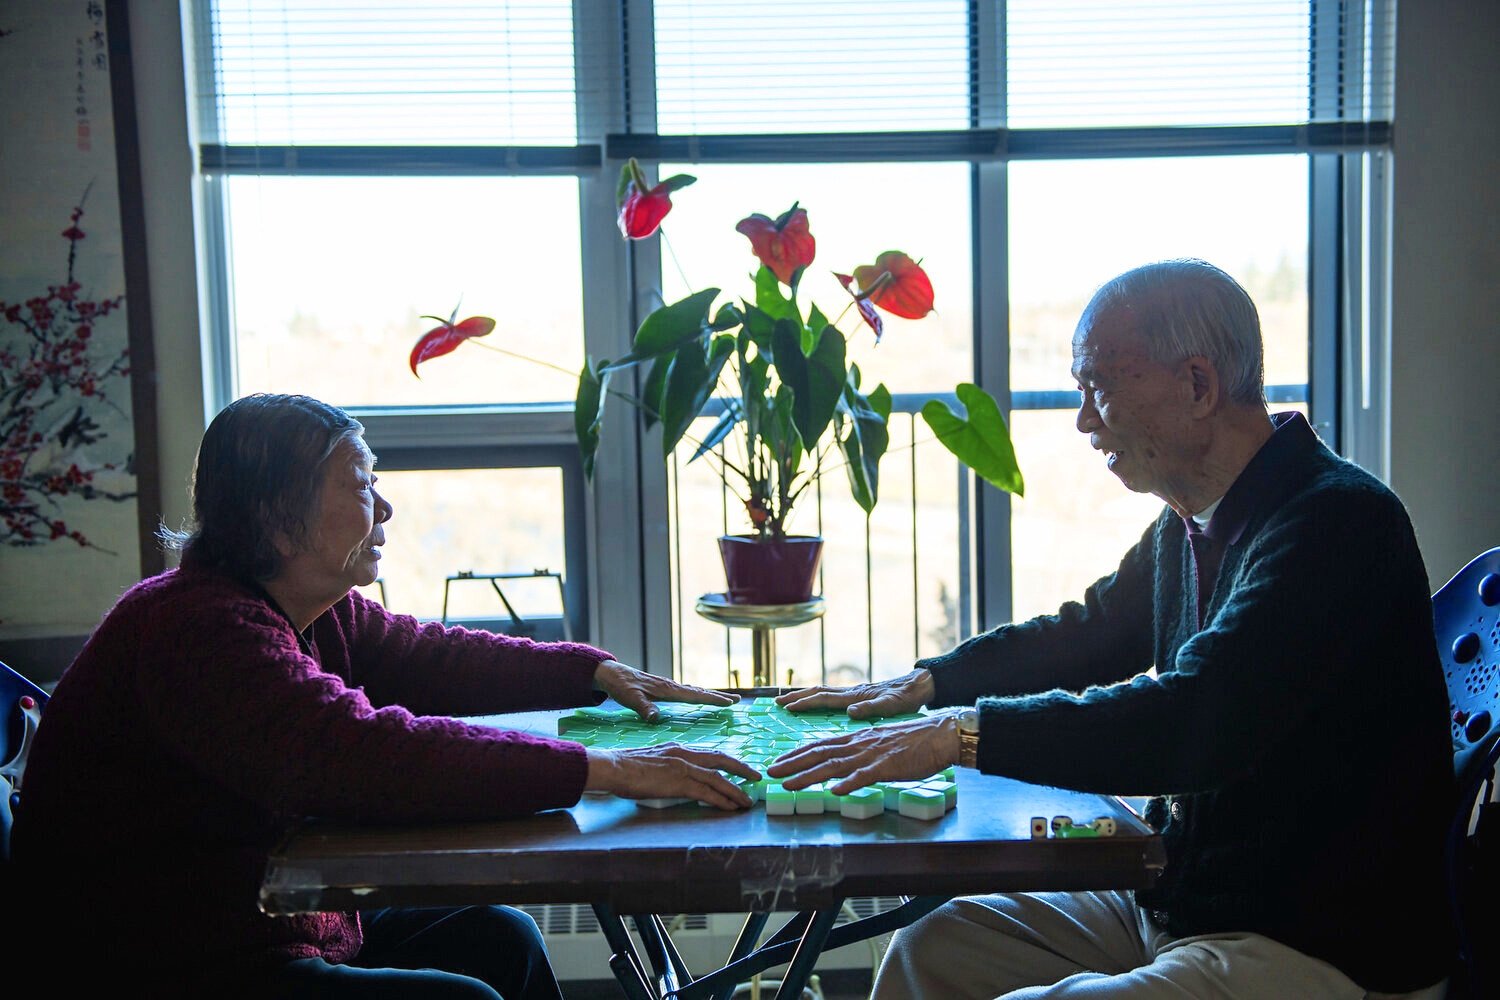  Everyday, Mr. and Ms. Fok play mahjong in their condo apartment located in Chinatown. Married in 1950 in Hong Kong, they retired and immigrated to Calgary in the early 1990s. Many Chinese immigrants choose Canada for its overall quality of life. In 